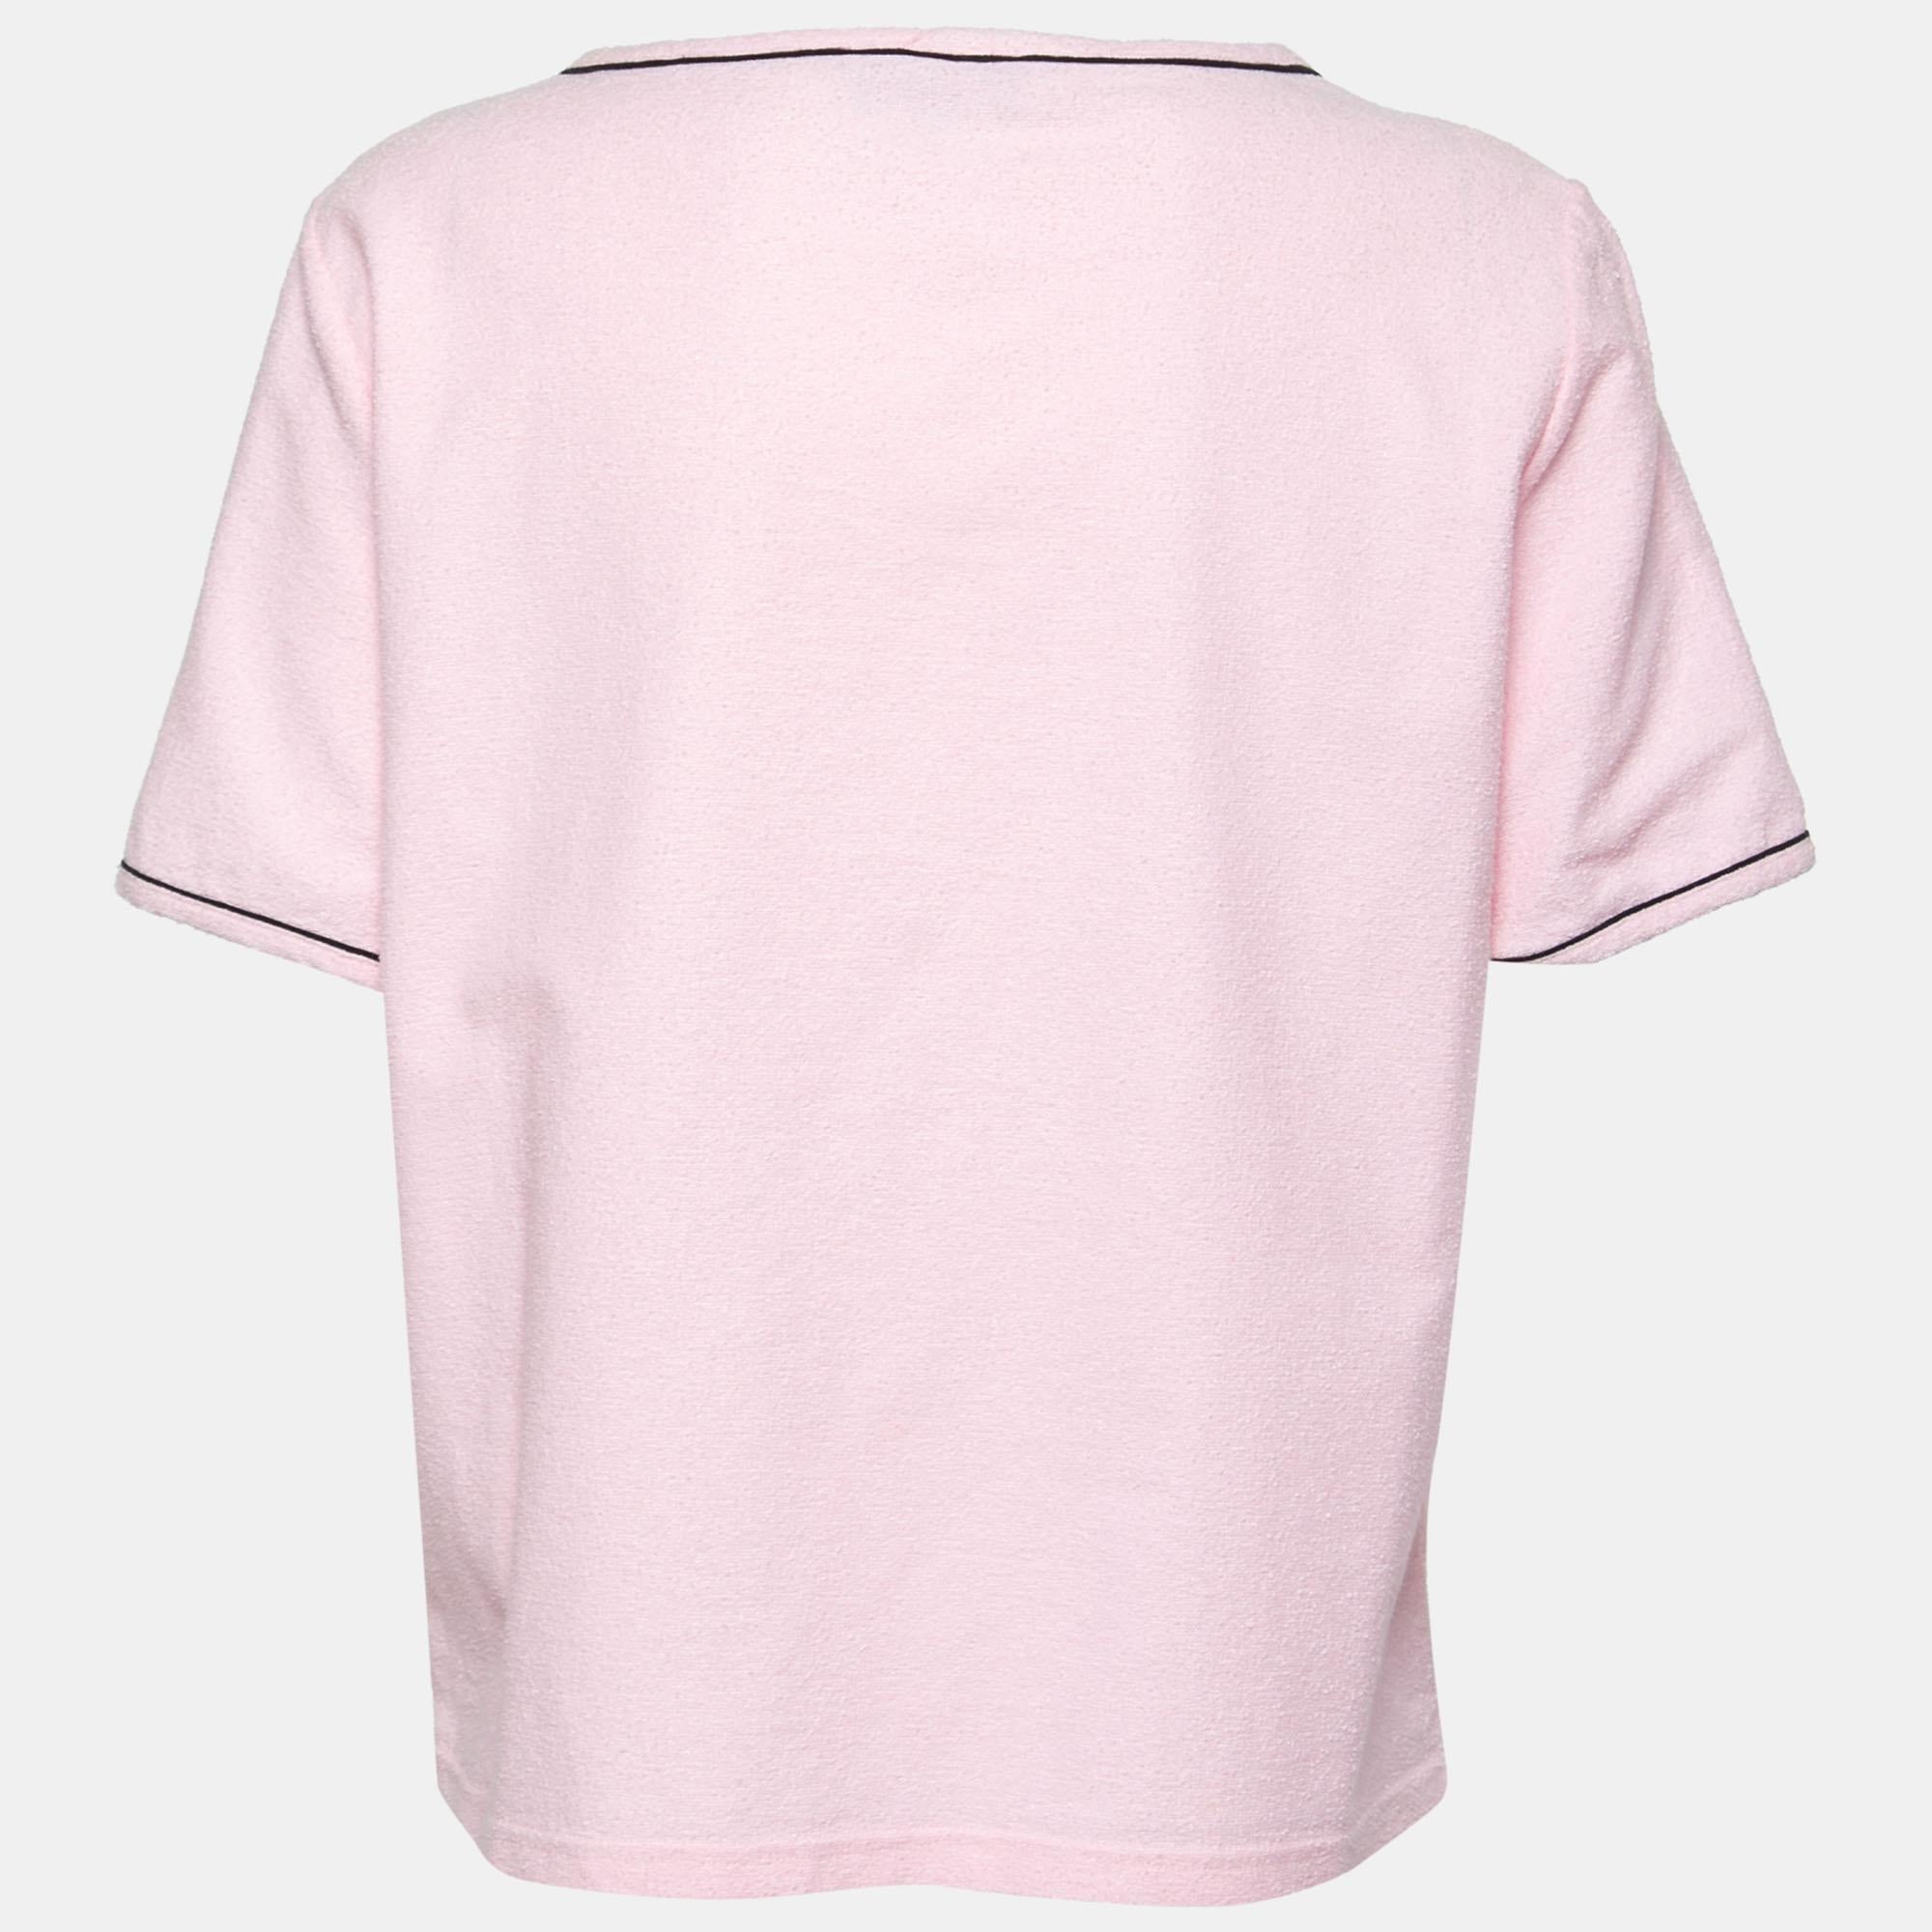 This T-shirt from Chanel is all about sporting a classy and comfy style. It is tailored from pink terry knit fabric, which is augmented with logo detailing on the front. It displays short sleeves. This T-shirt is great for casual use and will make